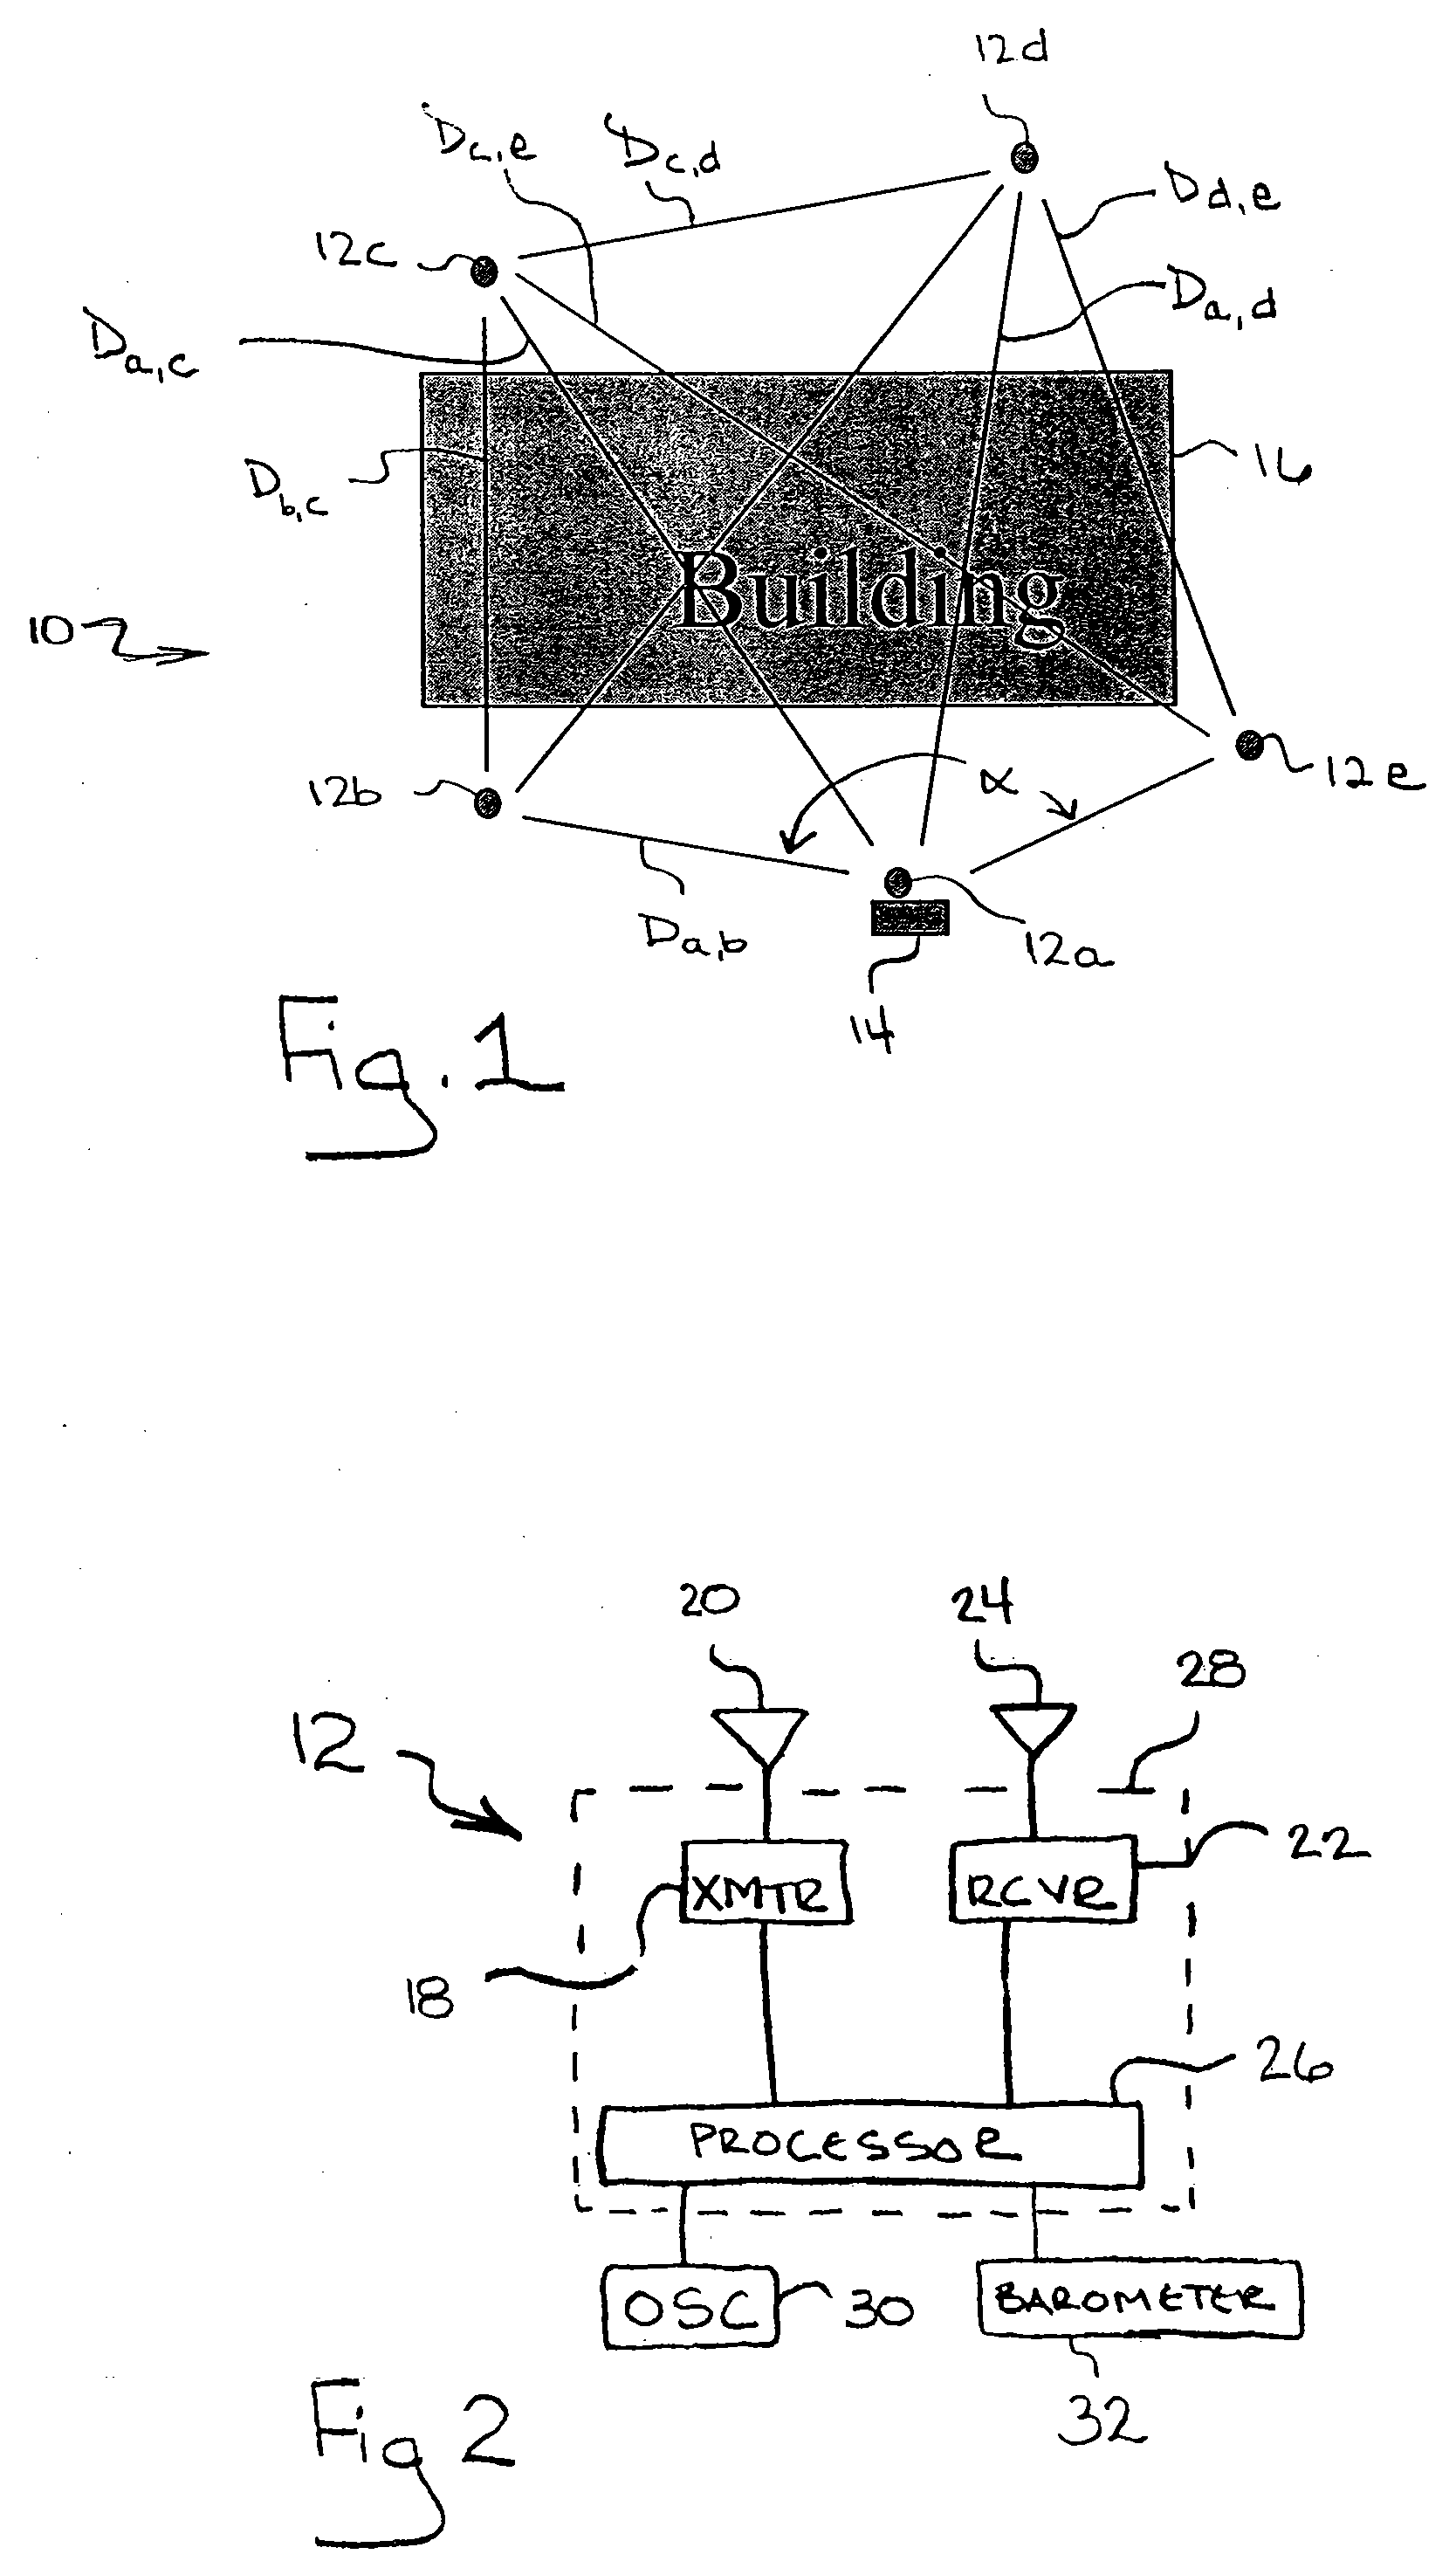 System and method to position register and phase synchronize a monitoring network